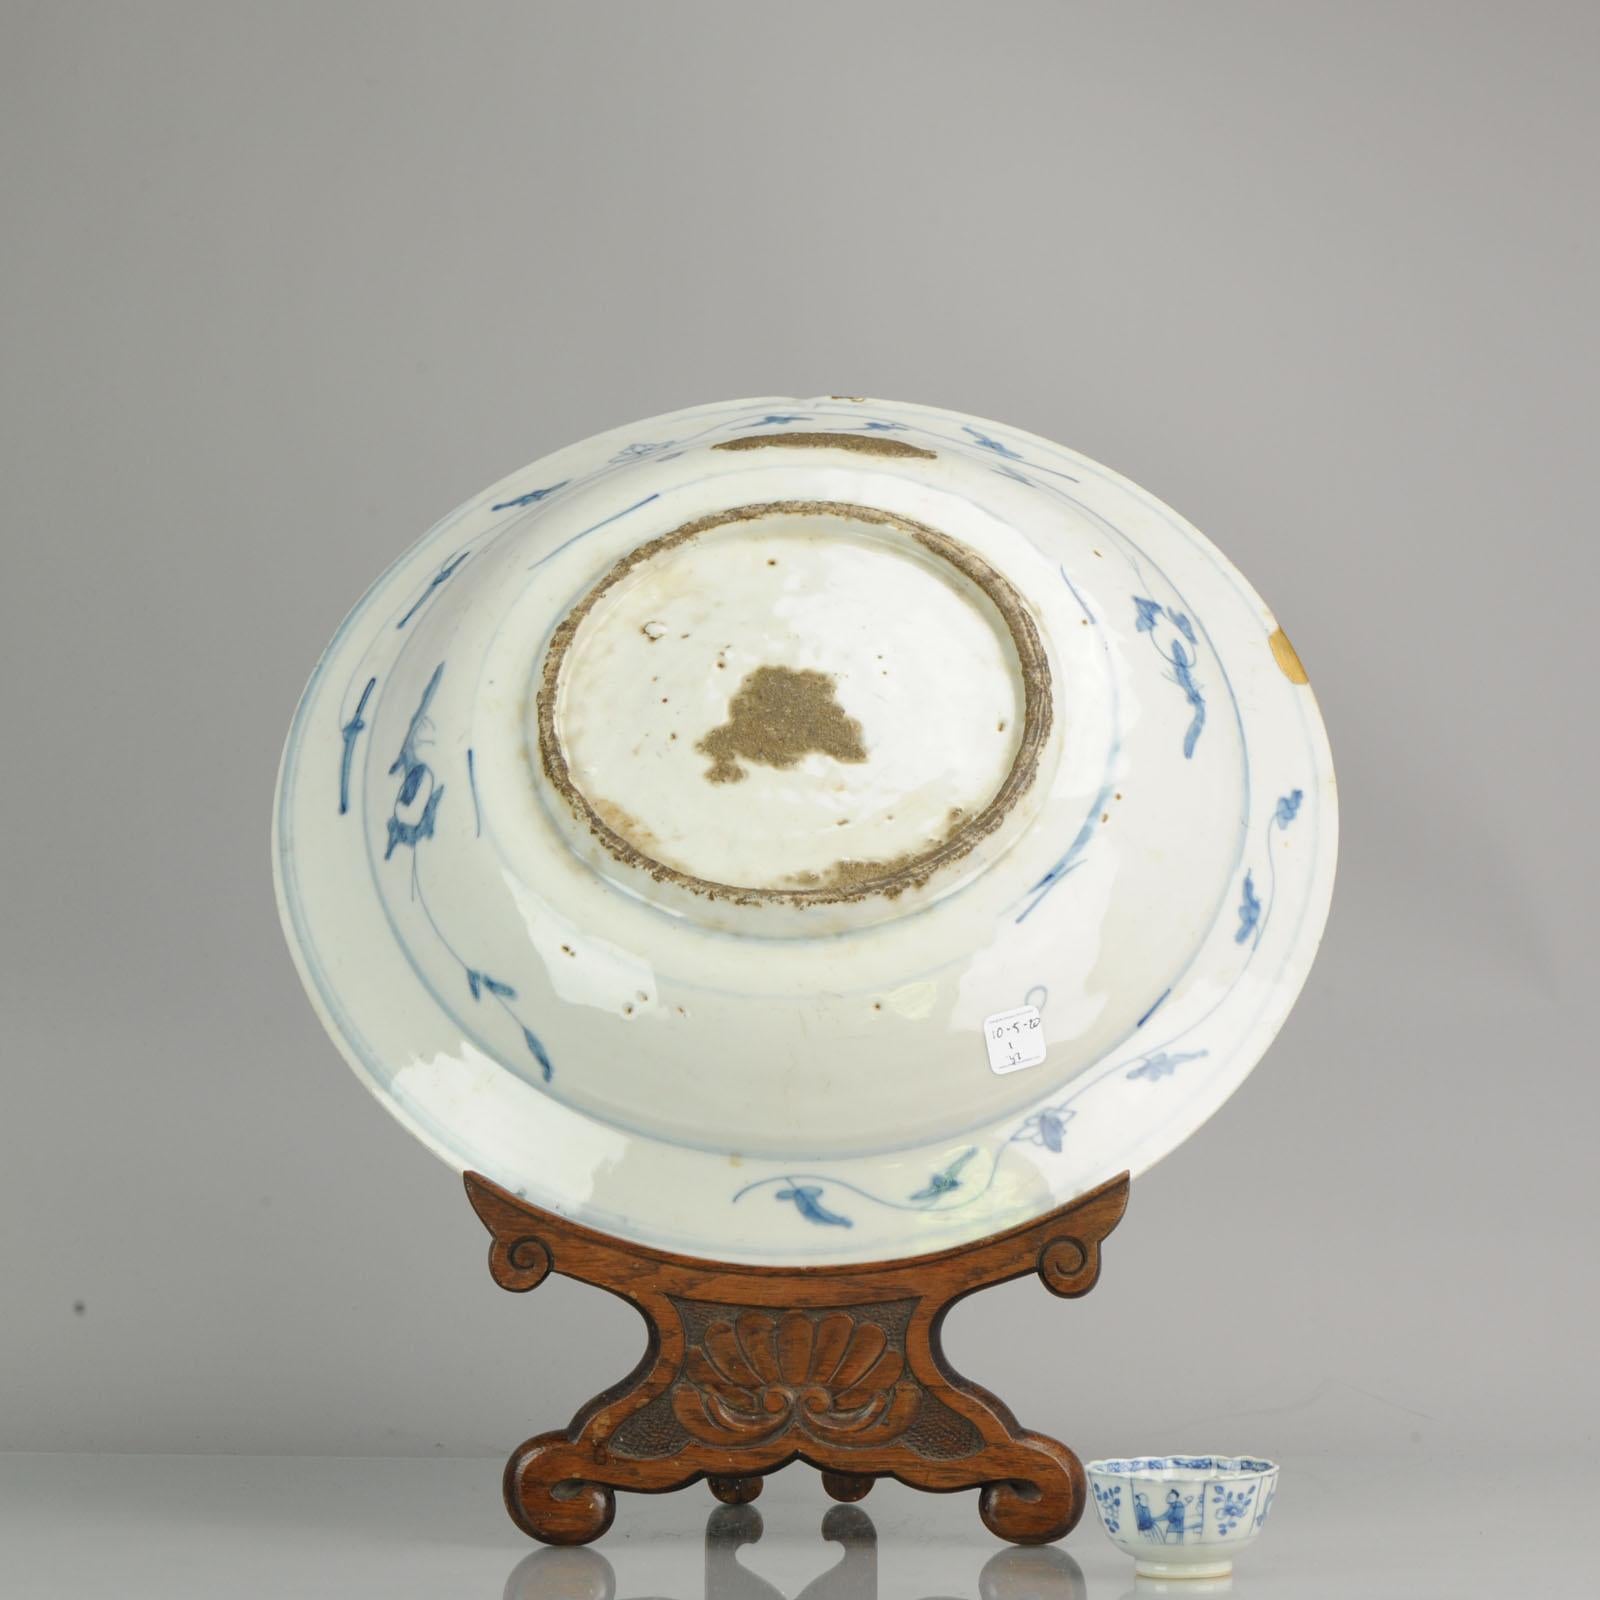 Majestic Zhangzhou Swatow Charger Deer China Ming Dynasty (1368-1644) In Fair Condition For Sale In Amsterdam, Noord Holland